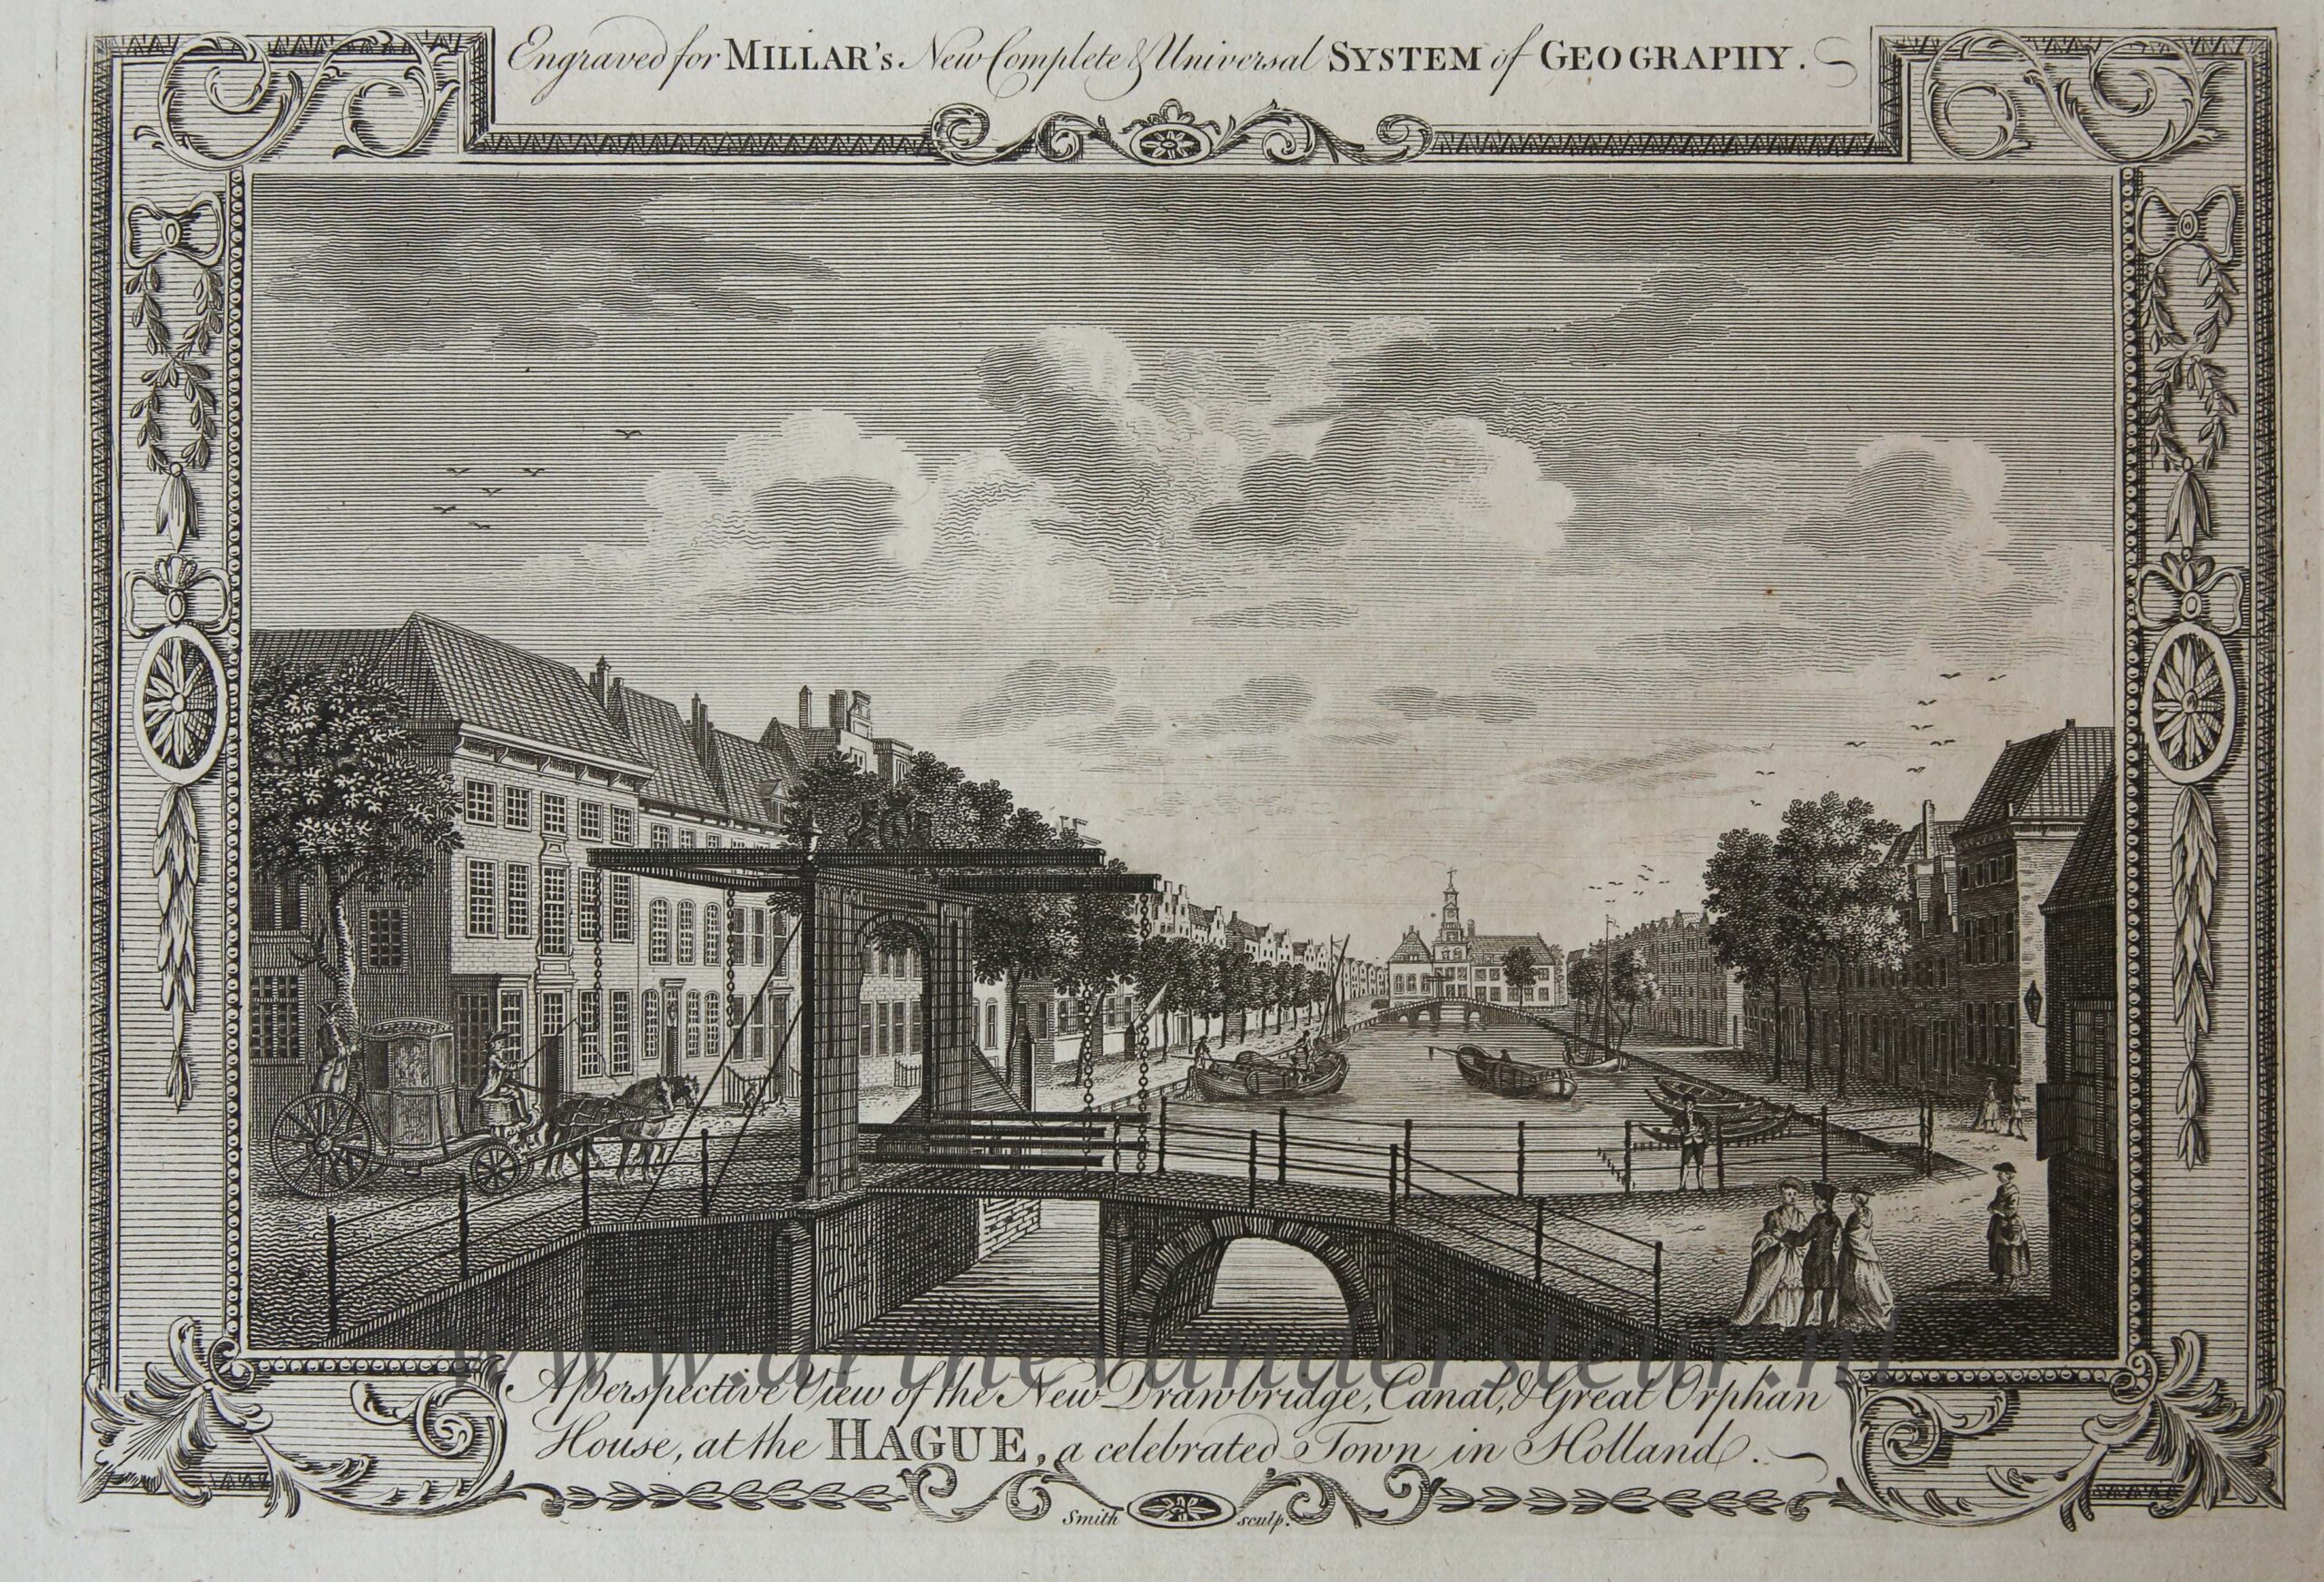 [Antique print, etching] A Perspective View of the New Drawbridge Canal and Great Orphan House at The Hague a celebrated Town in Holland (Bierkade Den Haag), published 1782.